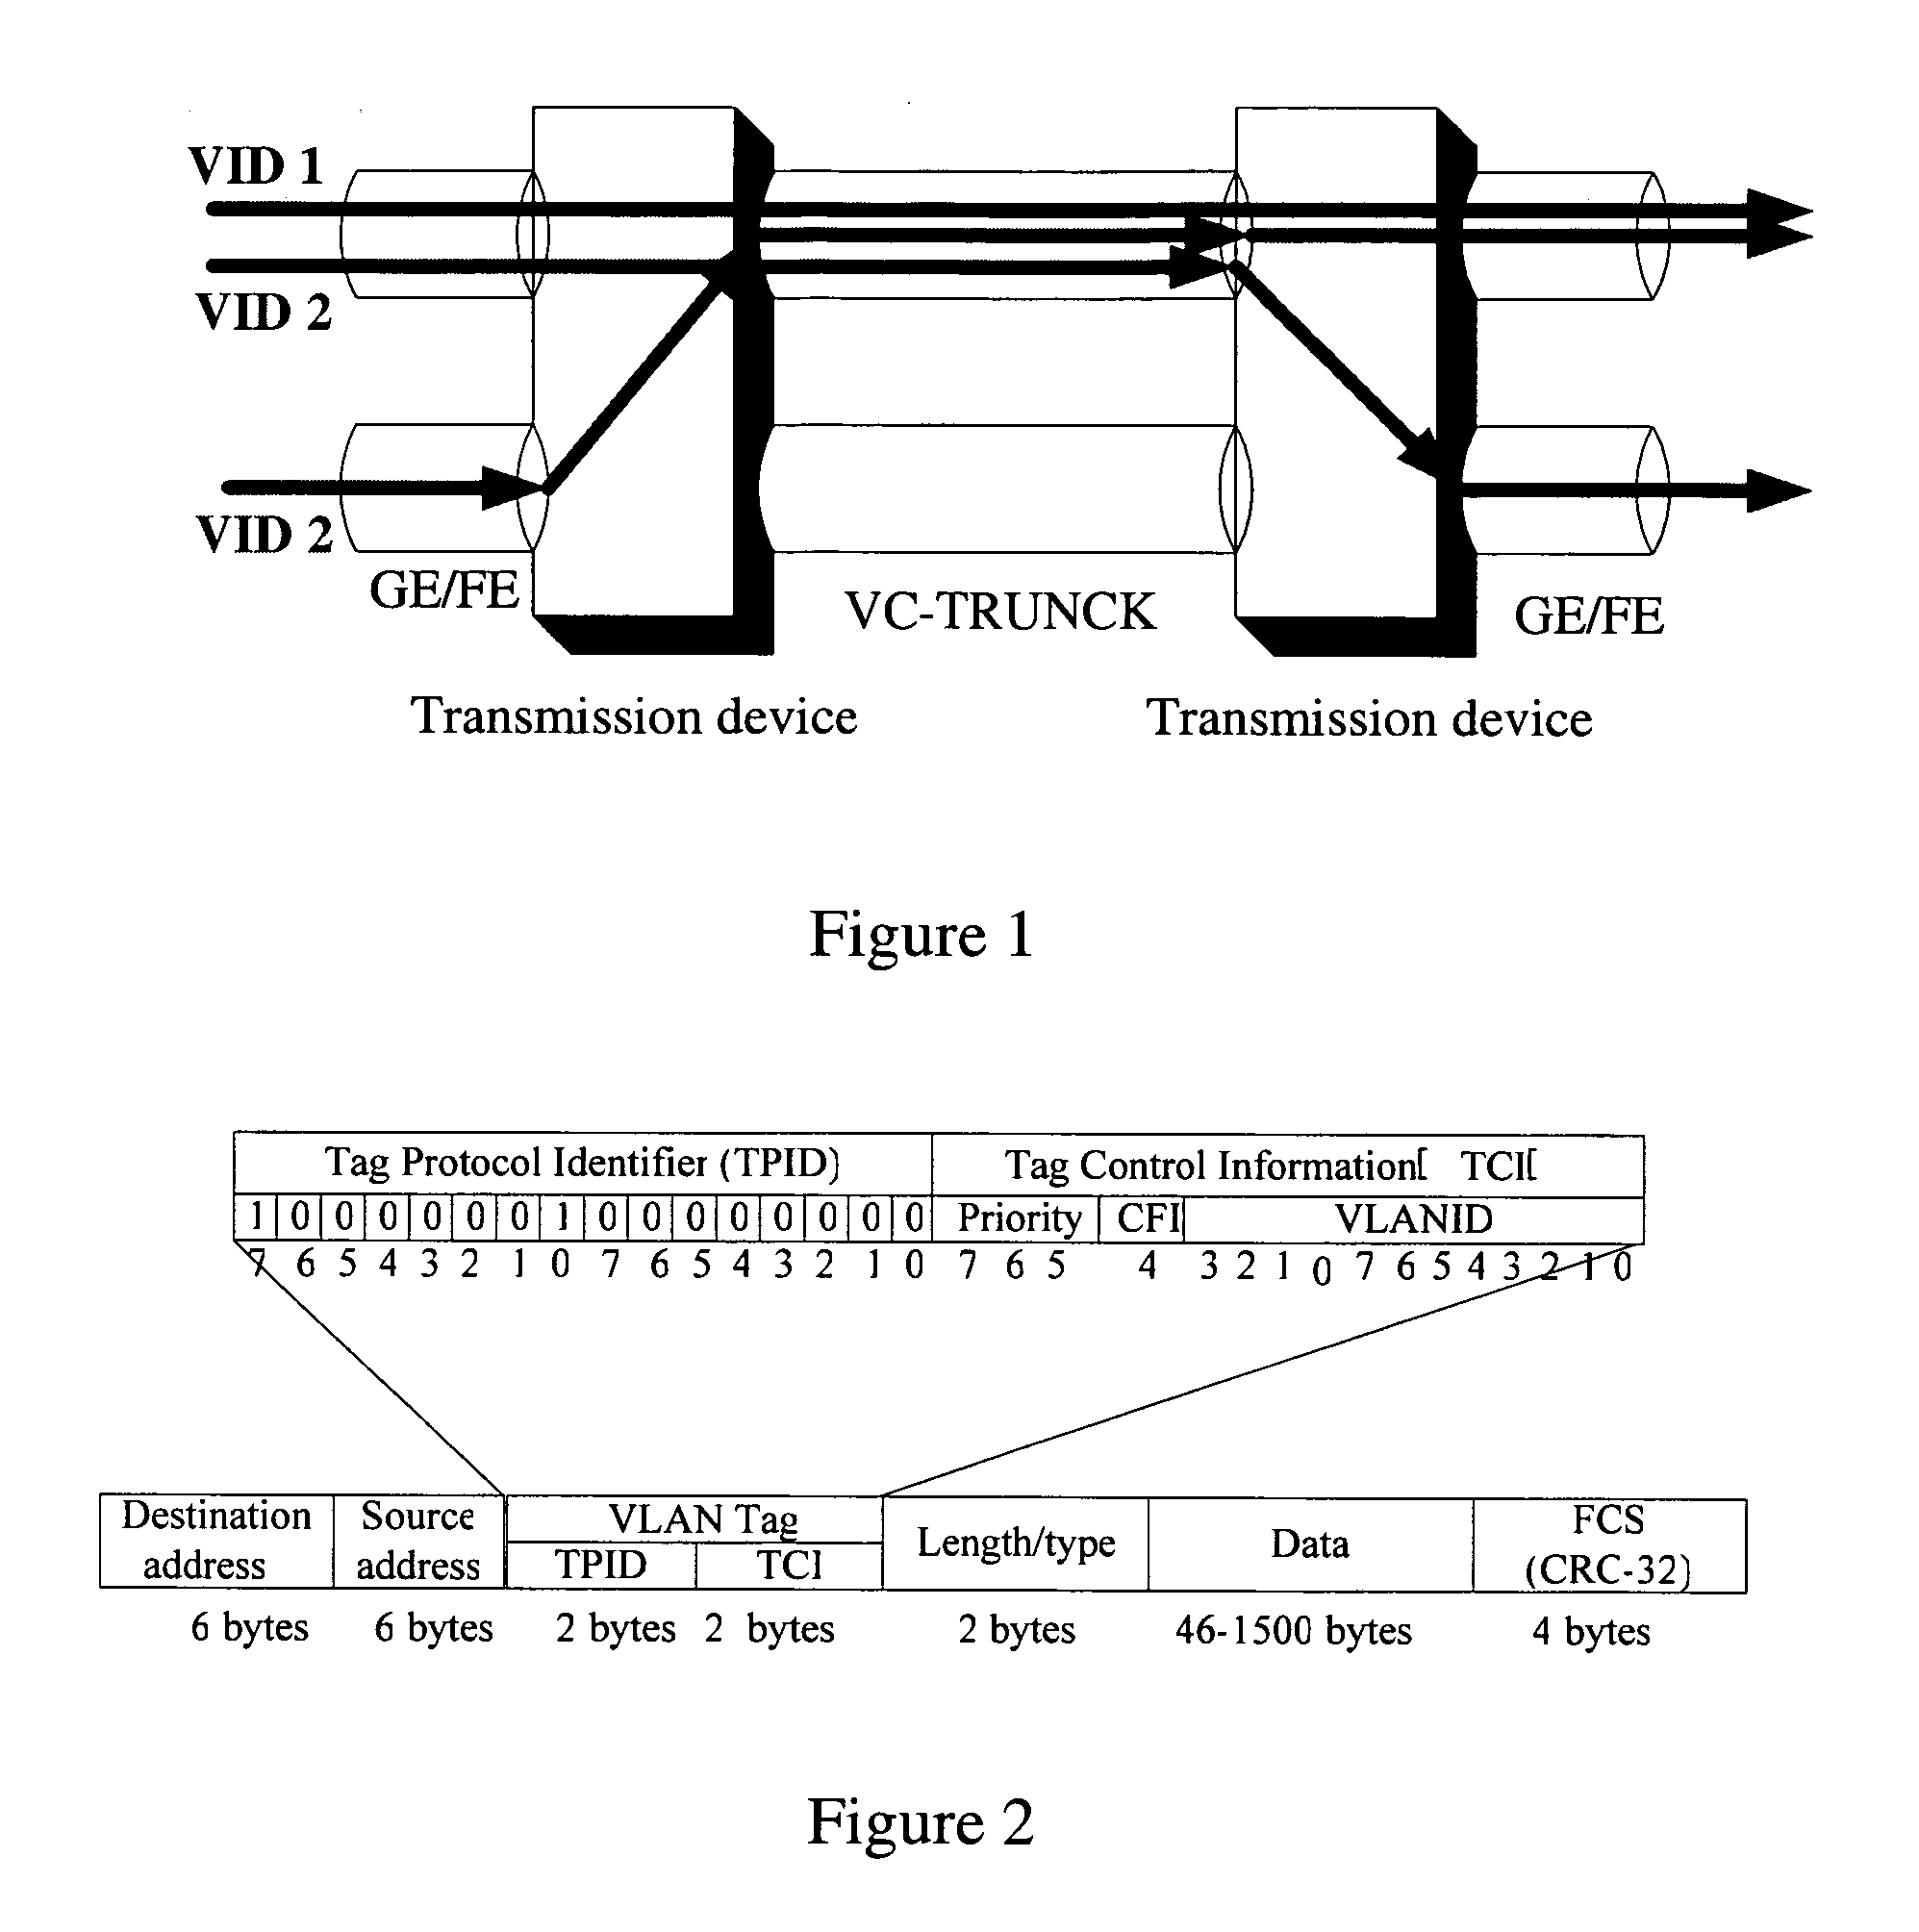 Sub-rate transmission method for user data services in transmission devices of a metropolitan area network